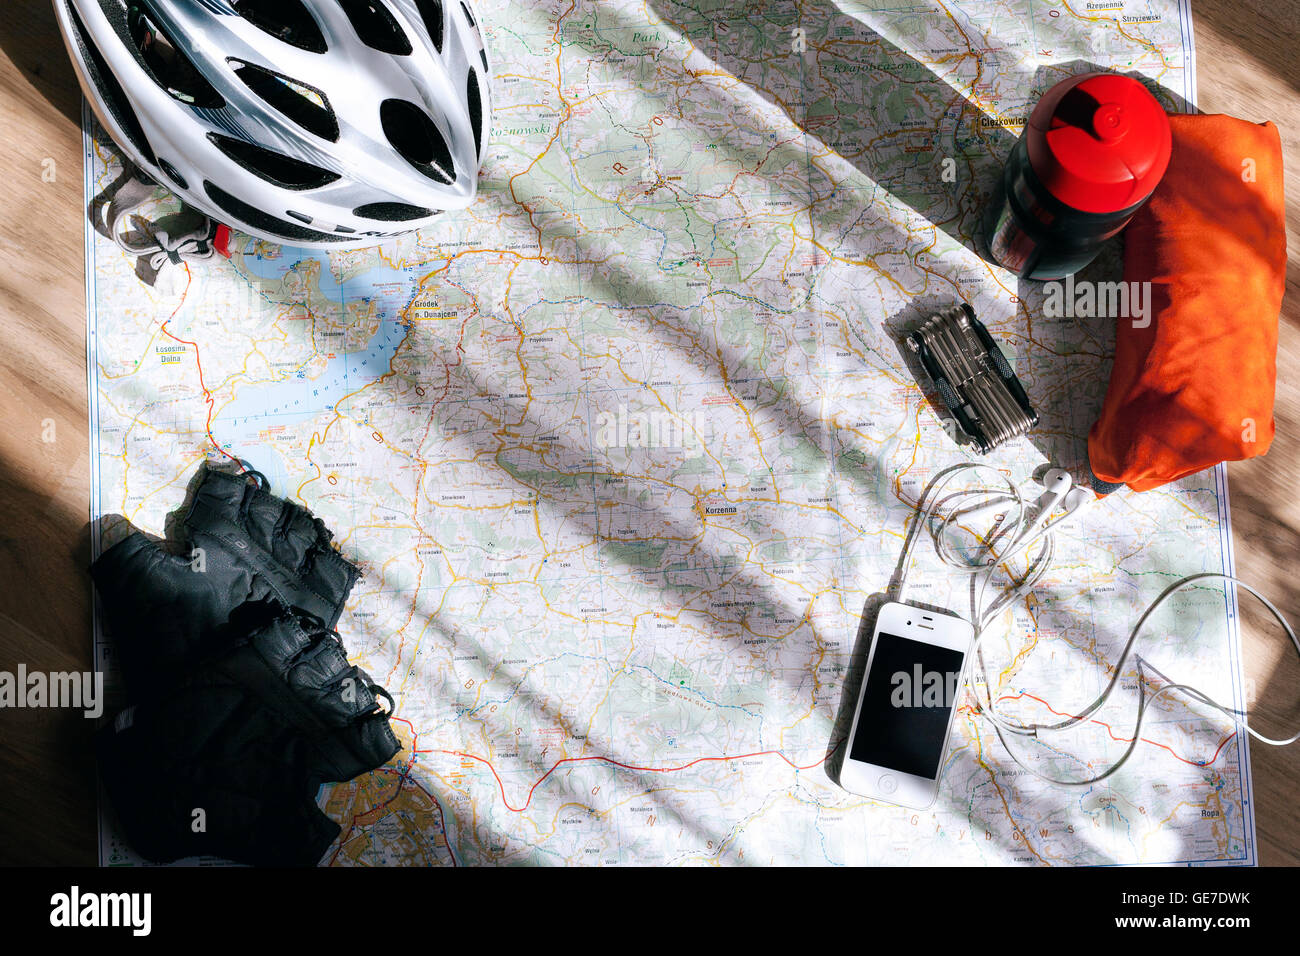 Bicycle accessories spread out on the map when planning a bike trip in the polish mountains. Stock Photo